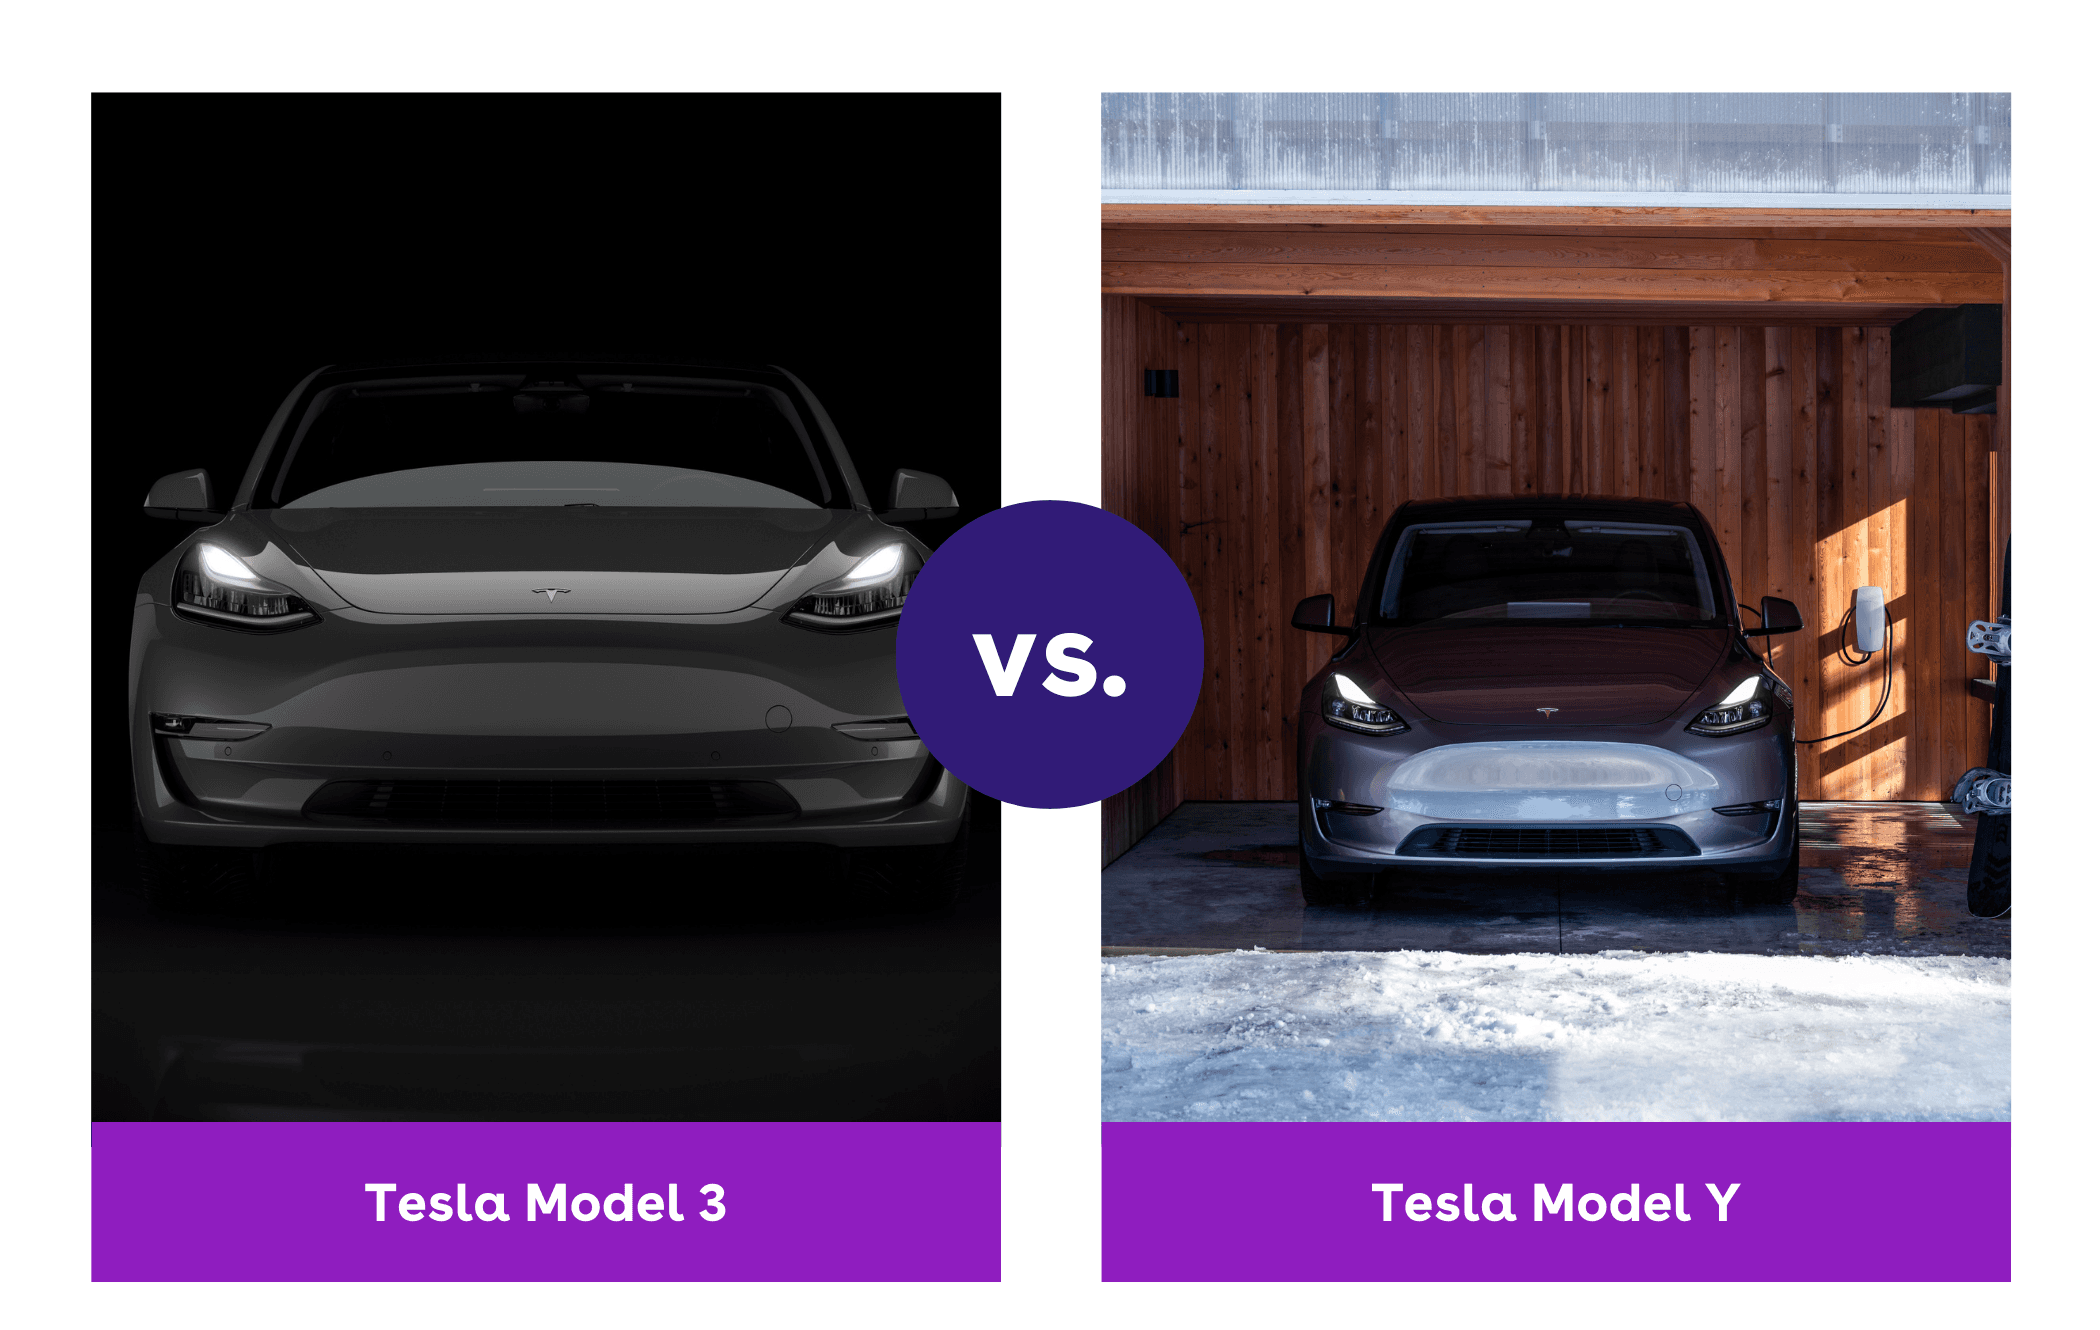 on the left is a black Tesla Model 3 and on the right is a grey Tesla Model Y parked in a garage covered in snow